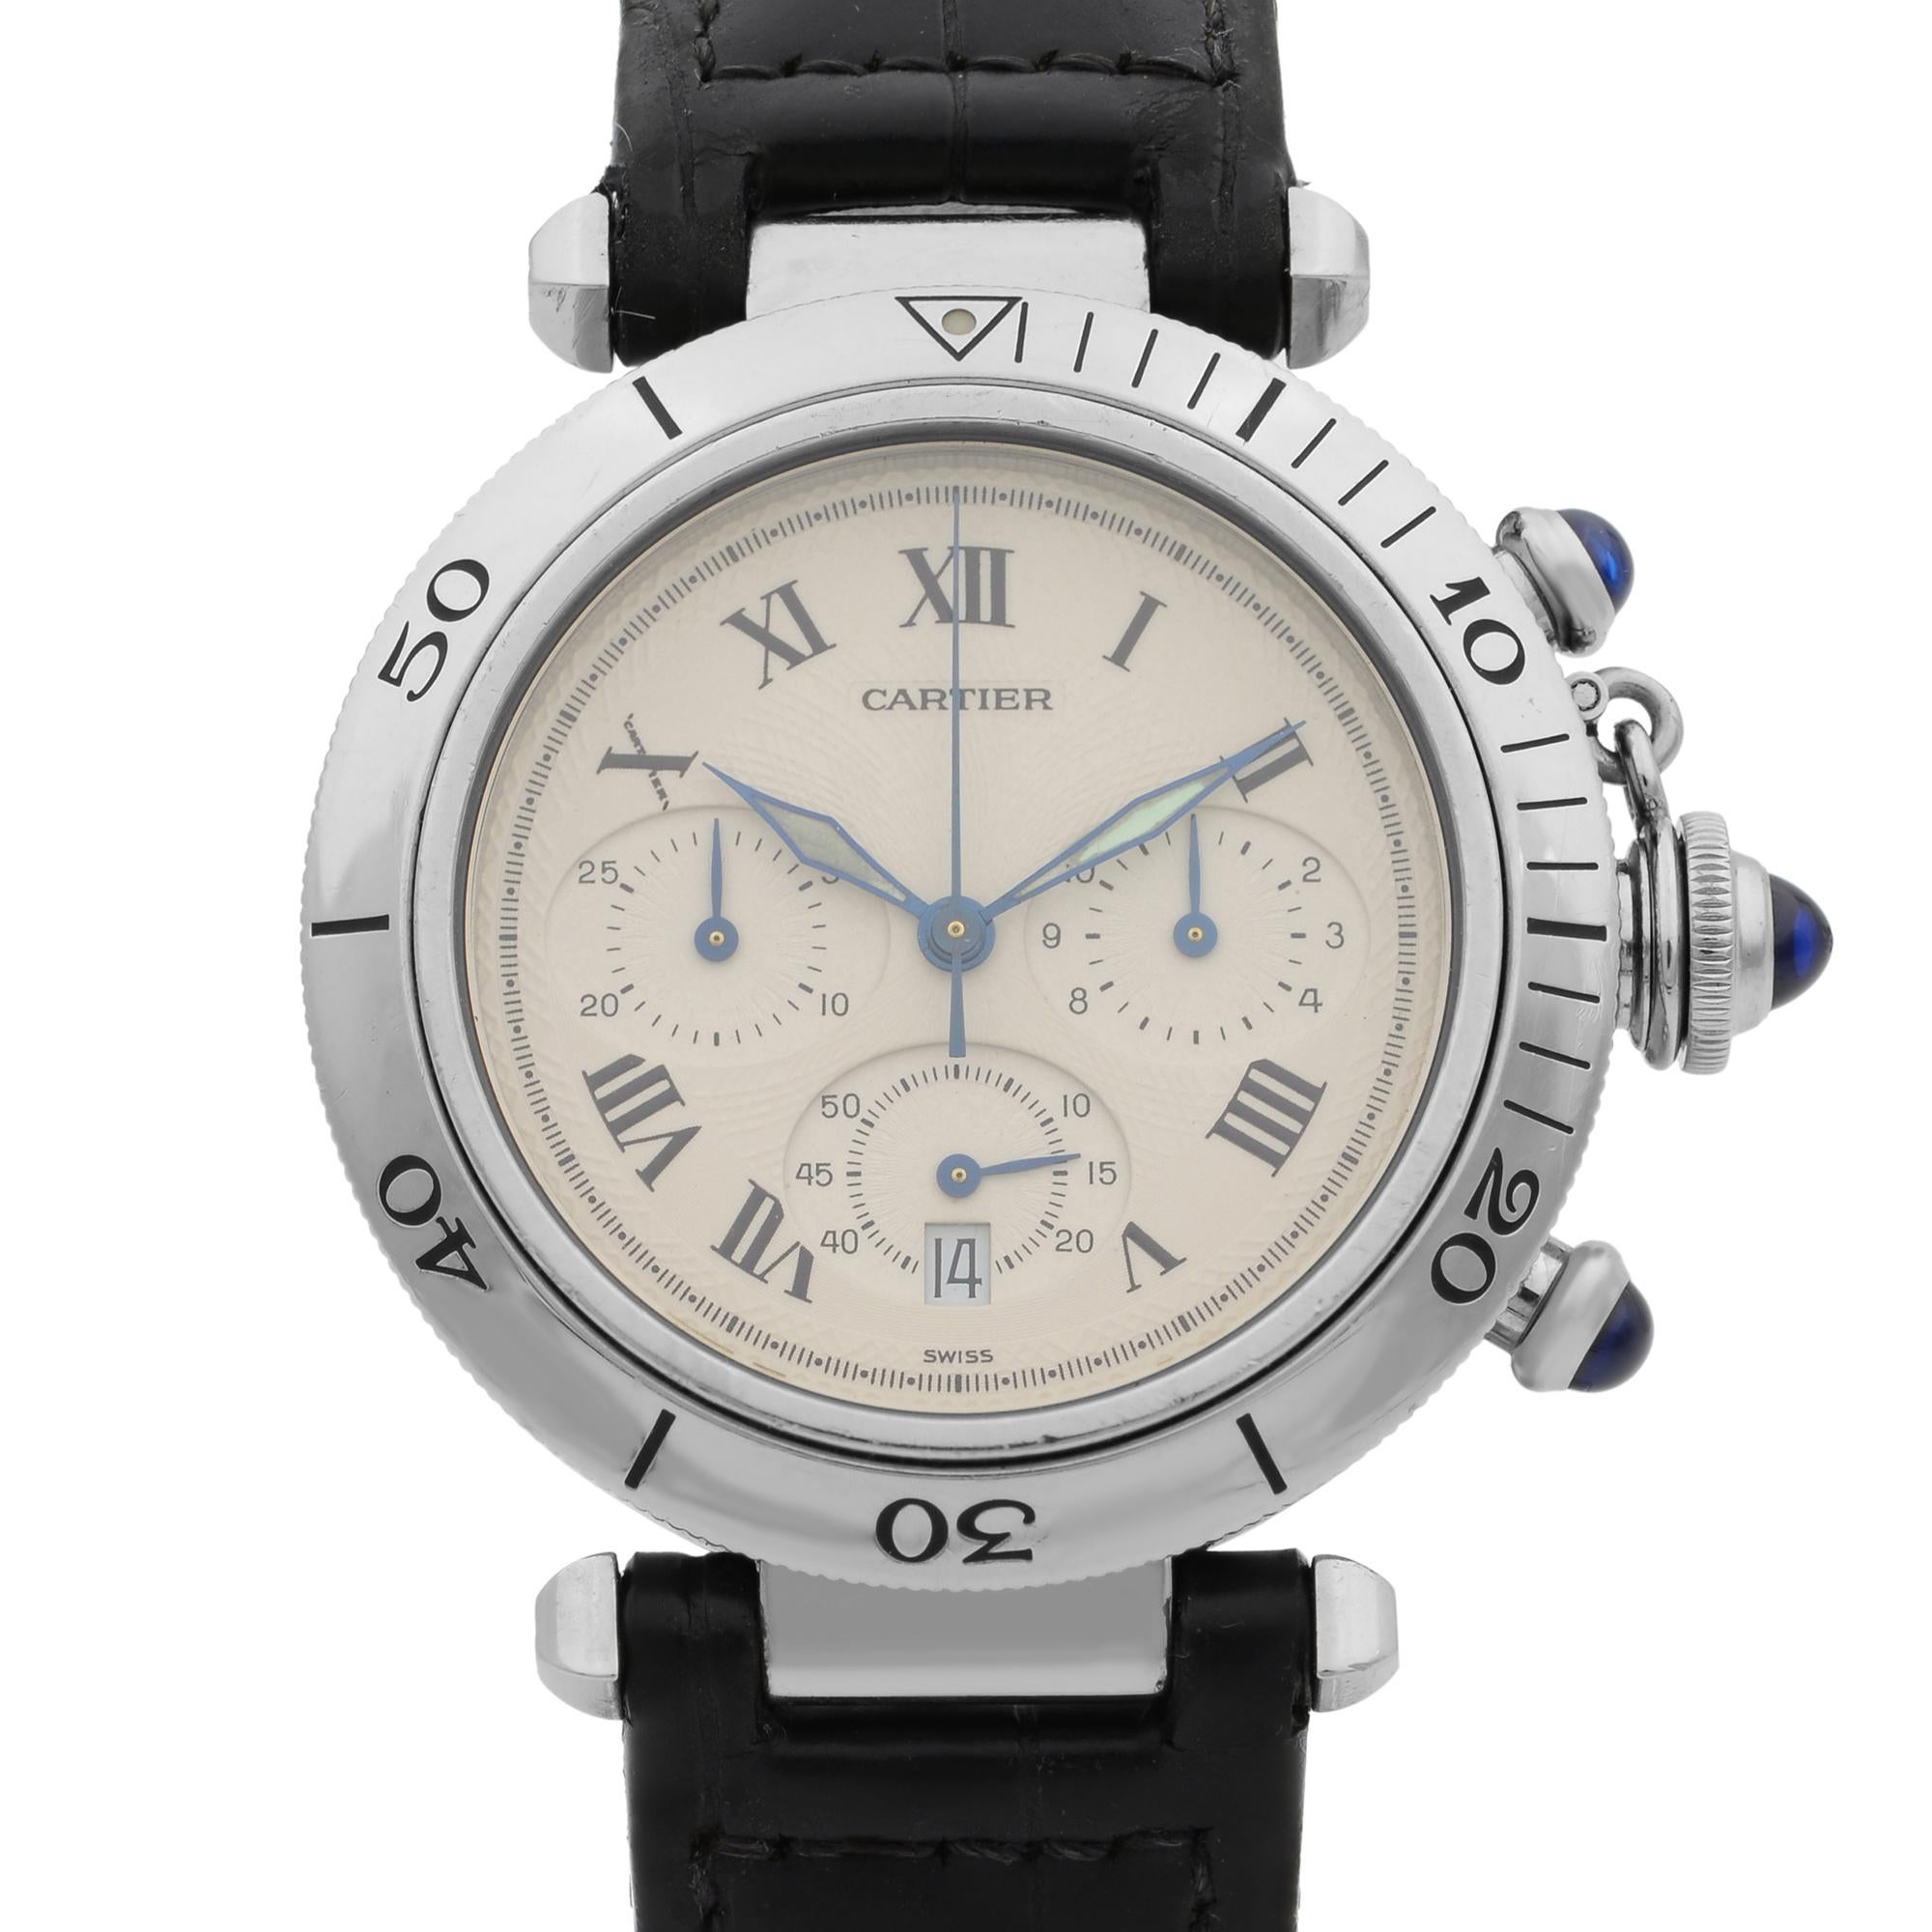 This pre-owned Cartier Pasha  1050 is a beautiful men's timepiece that is powered by quartz (battery) movement which is cased in a stainless steel case. It has a round shape face, chronograph hand, date indicator, small seconds subdial dial, and has